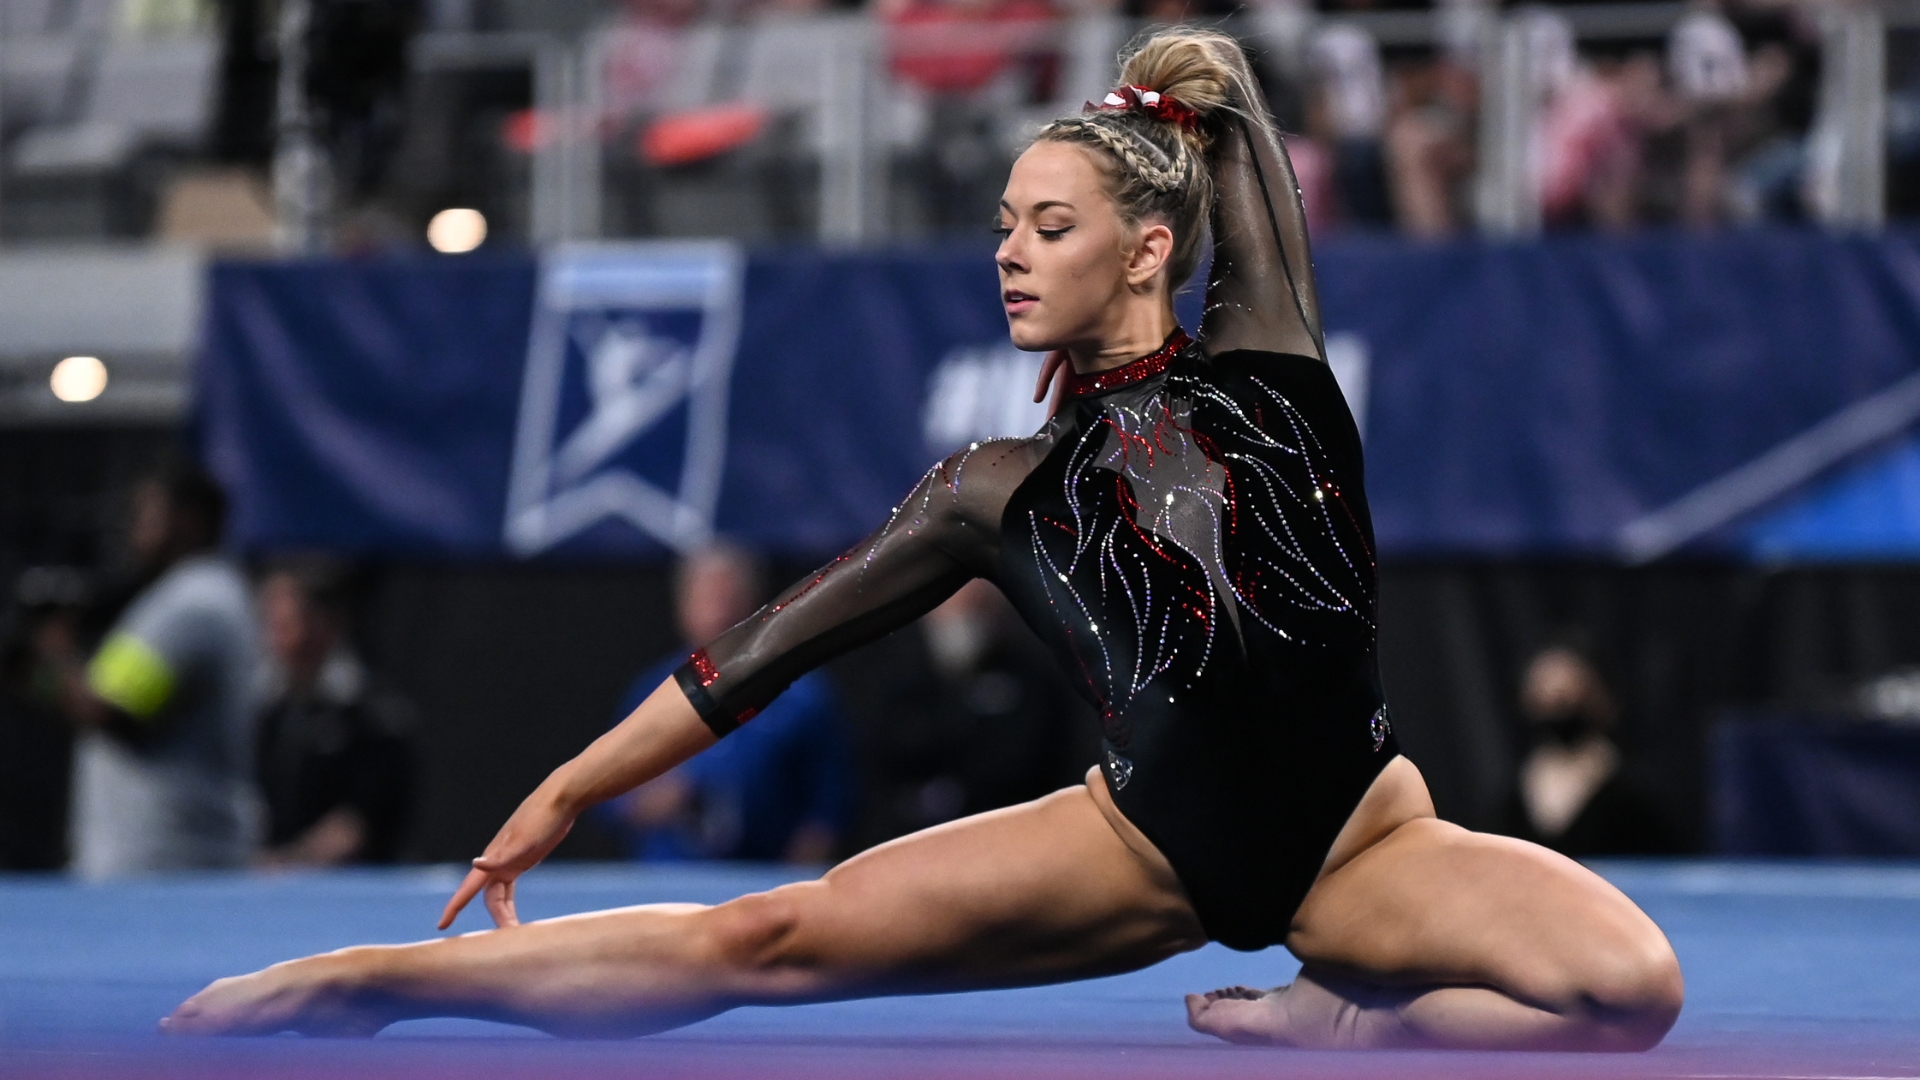 2023 NCAA Women's Gymnastics Preview Oklahoma is once again the team